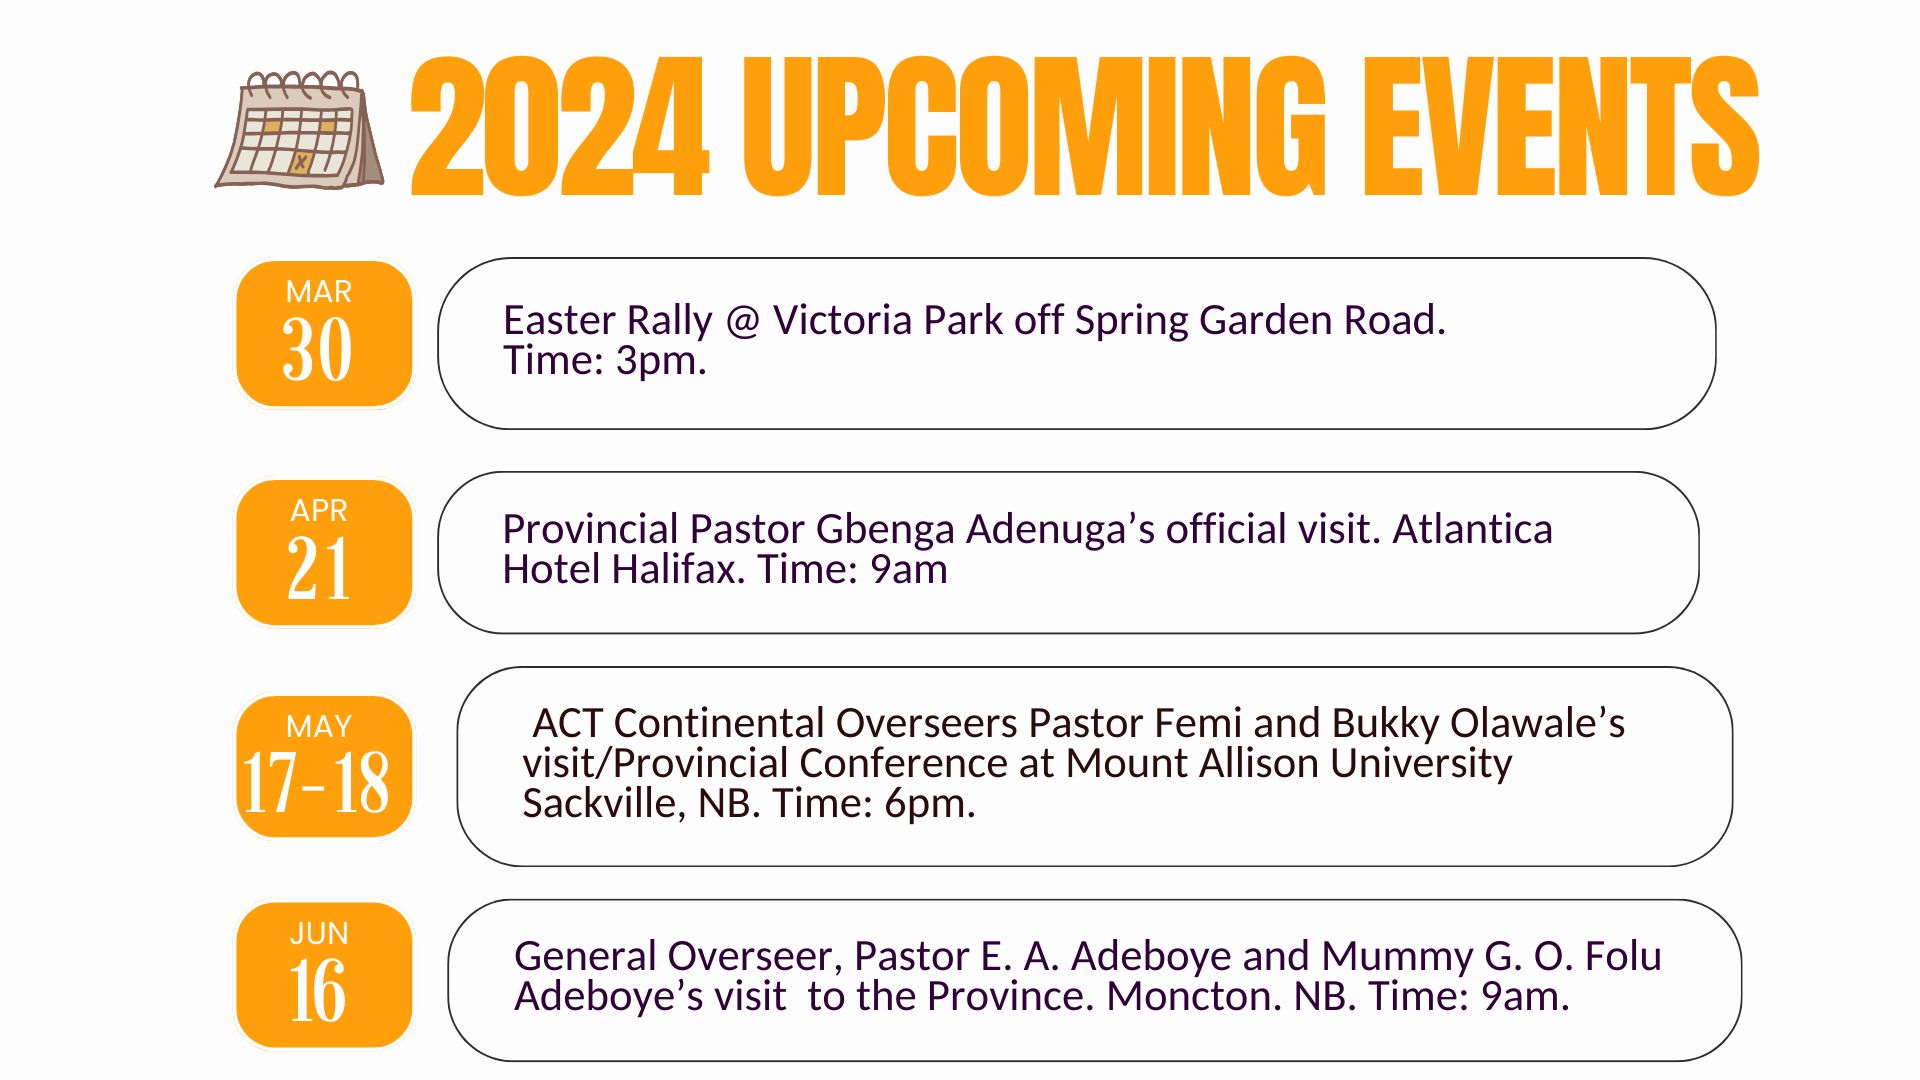 RCCG JESUS HOUSE HALIFAX - ANNOUNCEMENTS - UPCOMING EVENTS